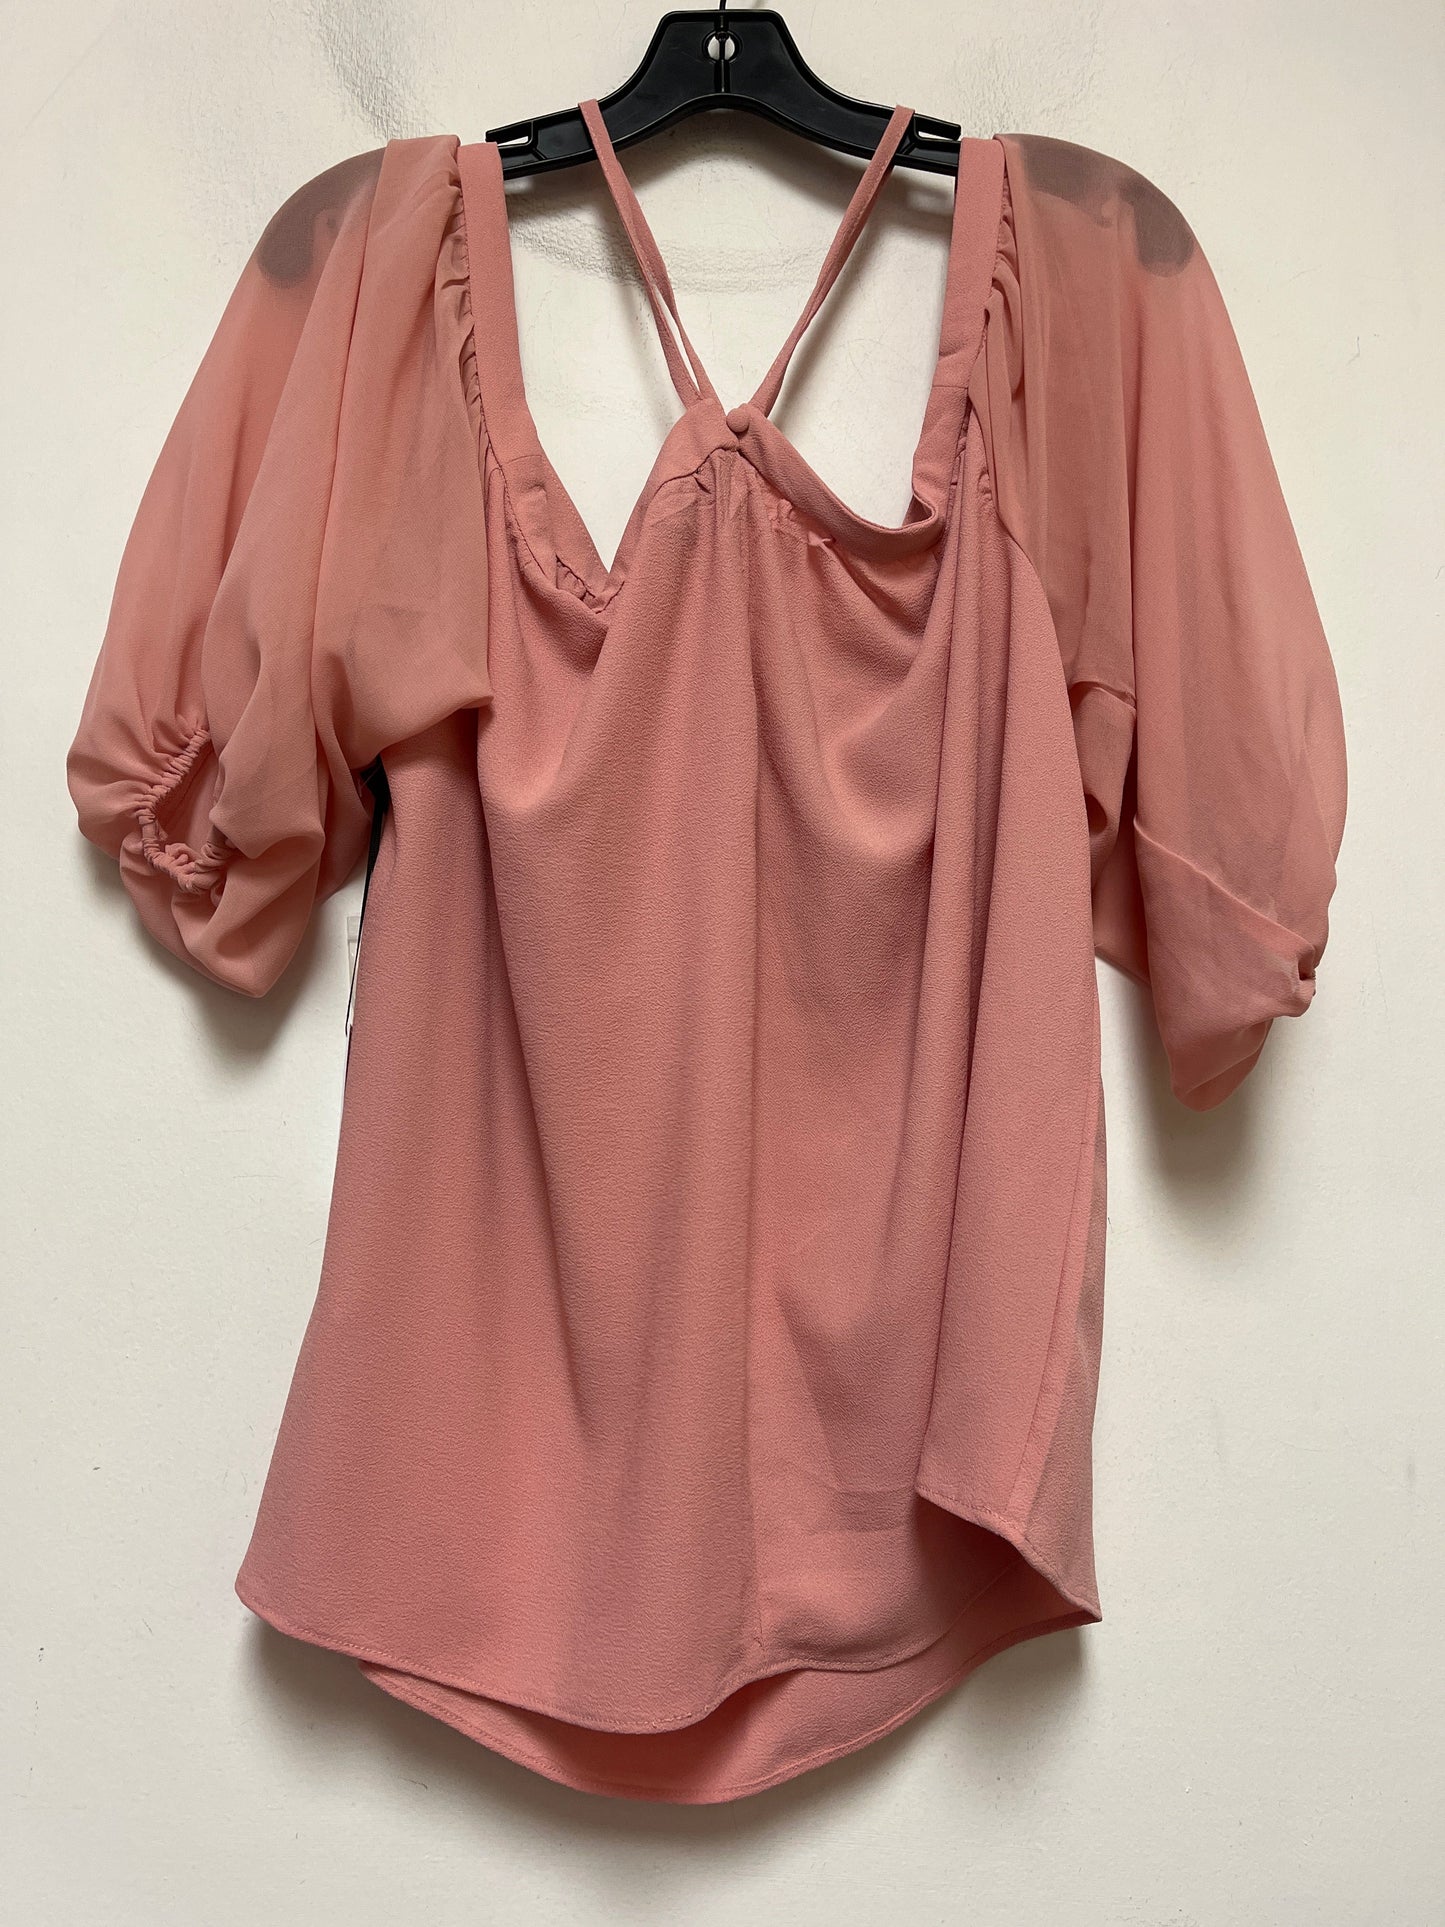 Pink Top Short Sleeve 1.state, Size 1x